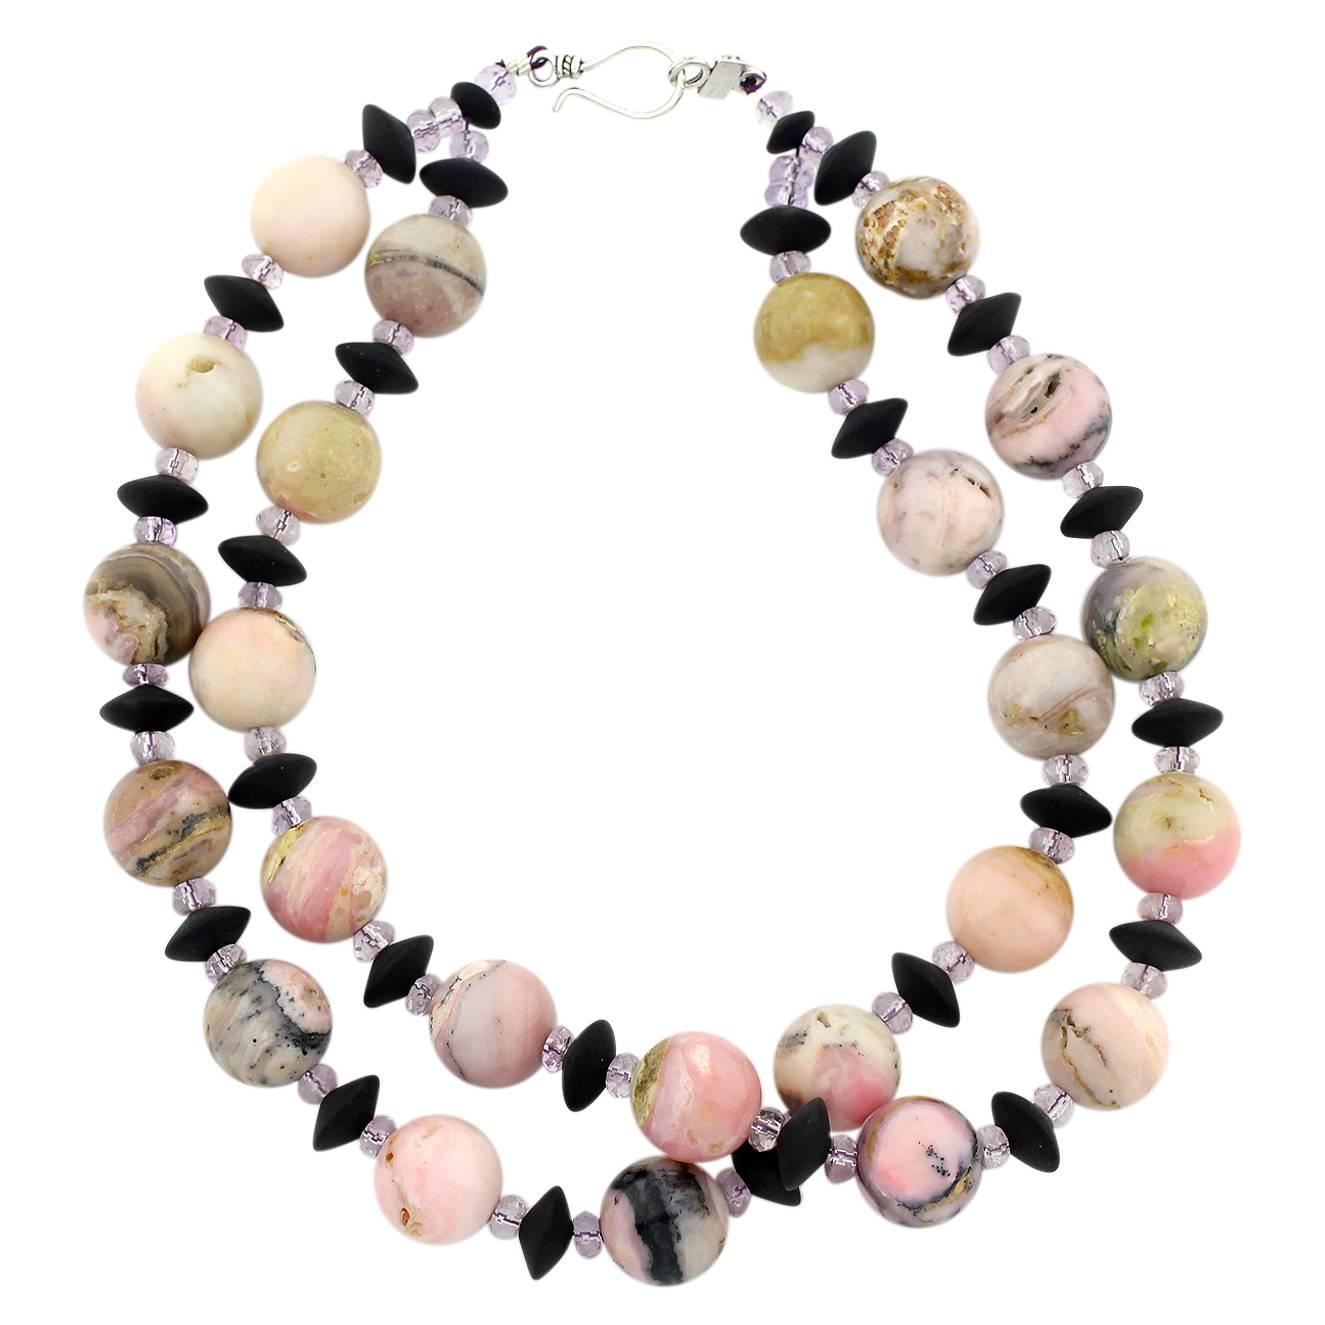 Necklace of Natural Peruvian Opals& Onyx